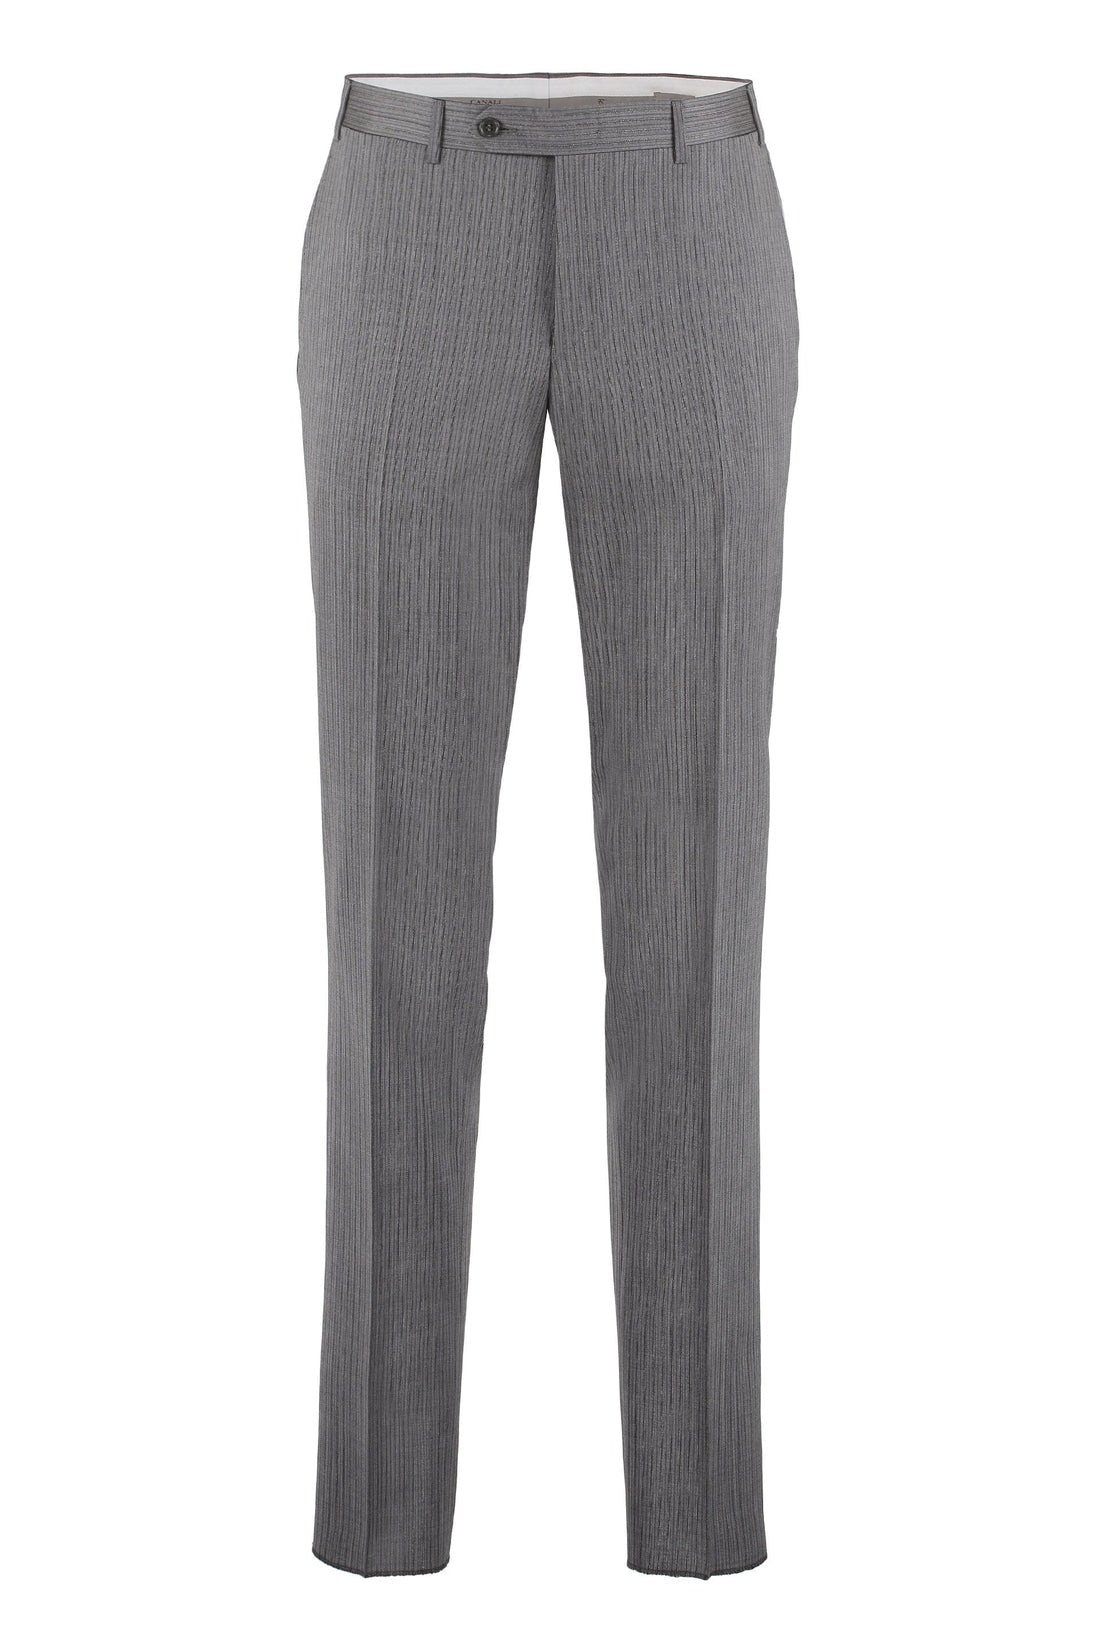 Canali-OUTLET-SALE-Tailored wool trousers-ARCHIVIST